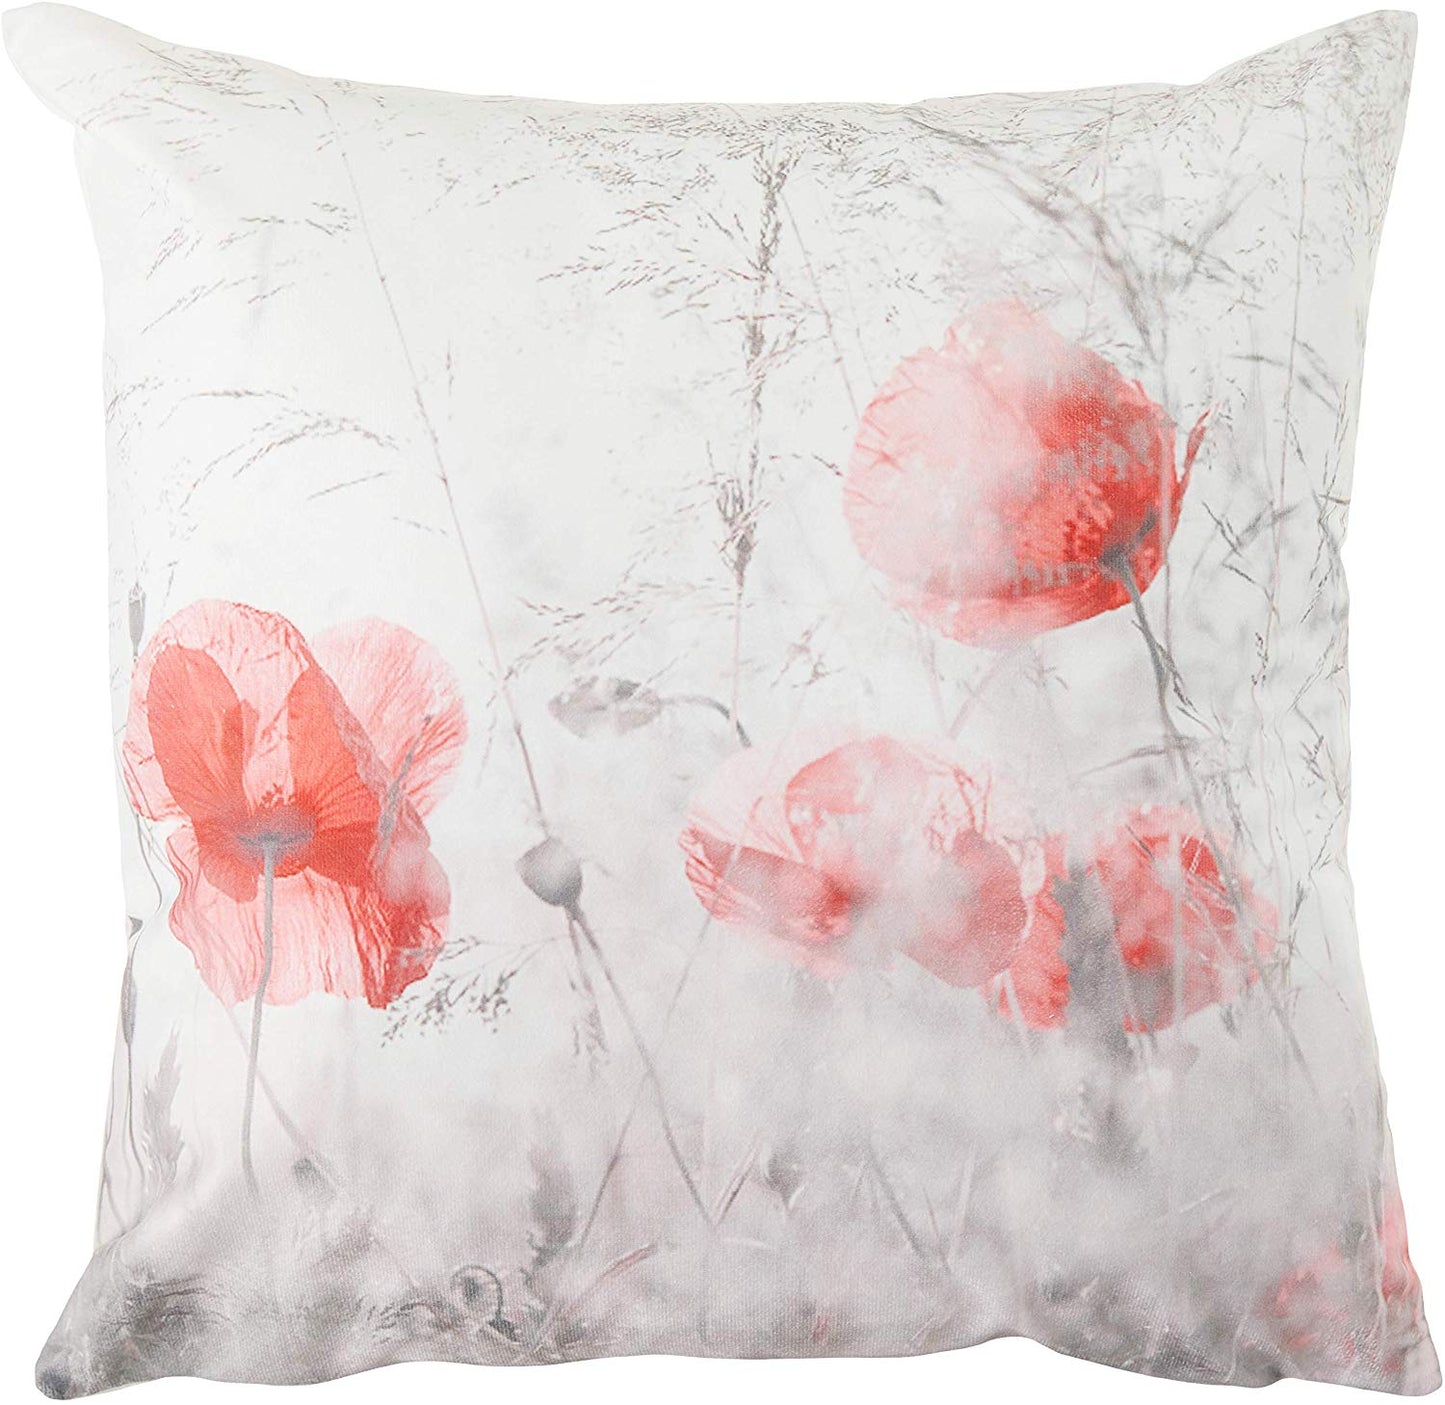 Heritage Floral Decorative Throw Pillow Cover